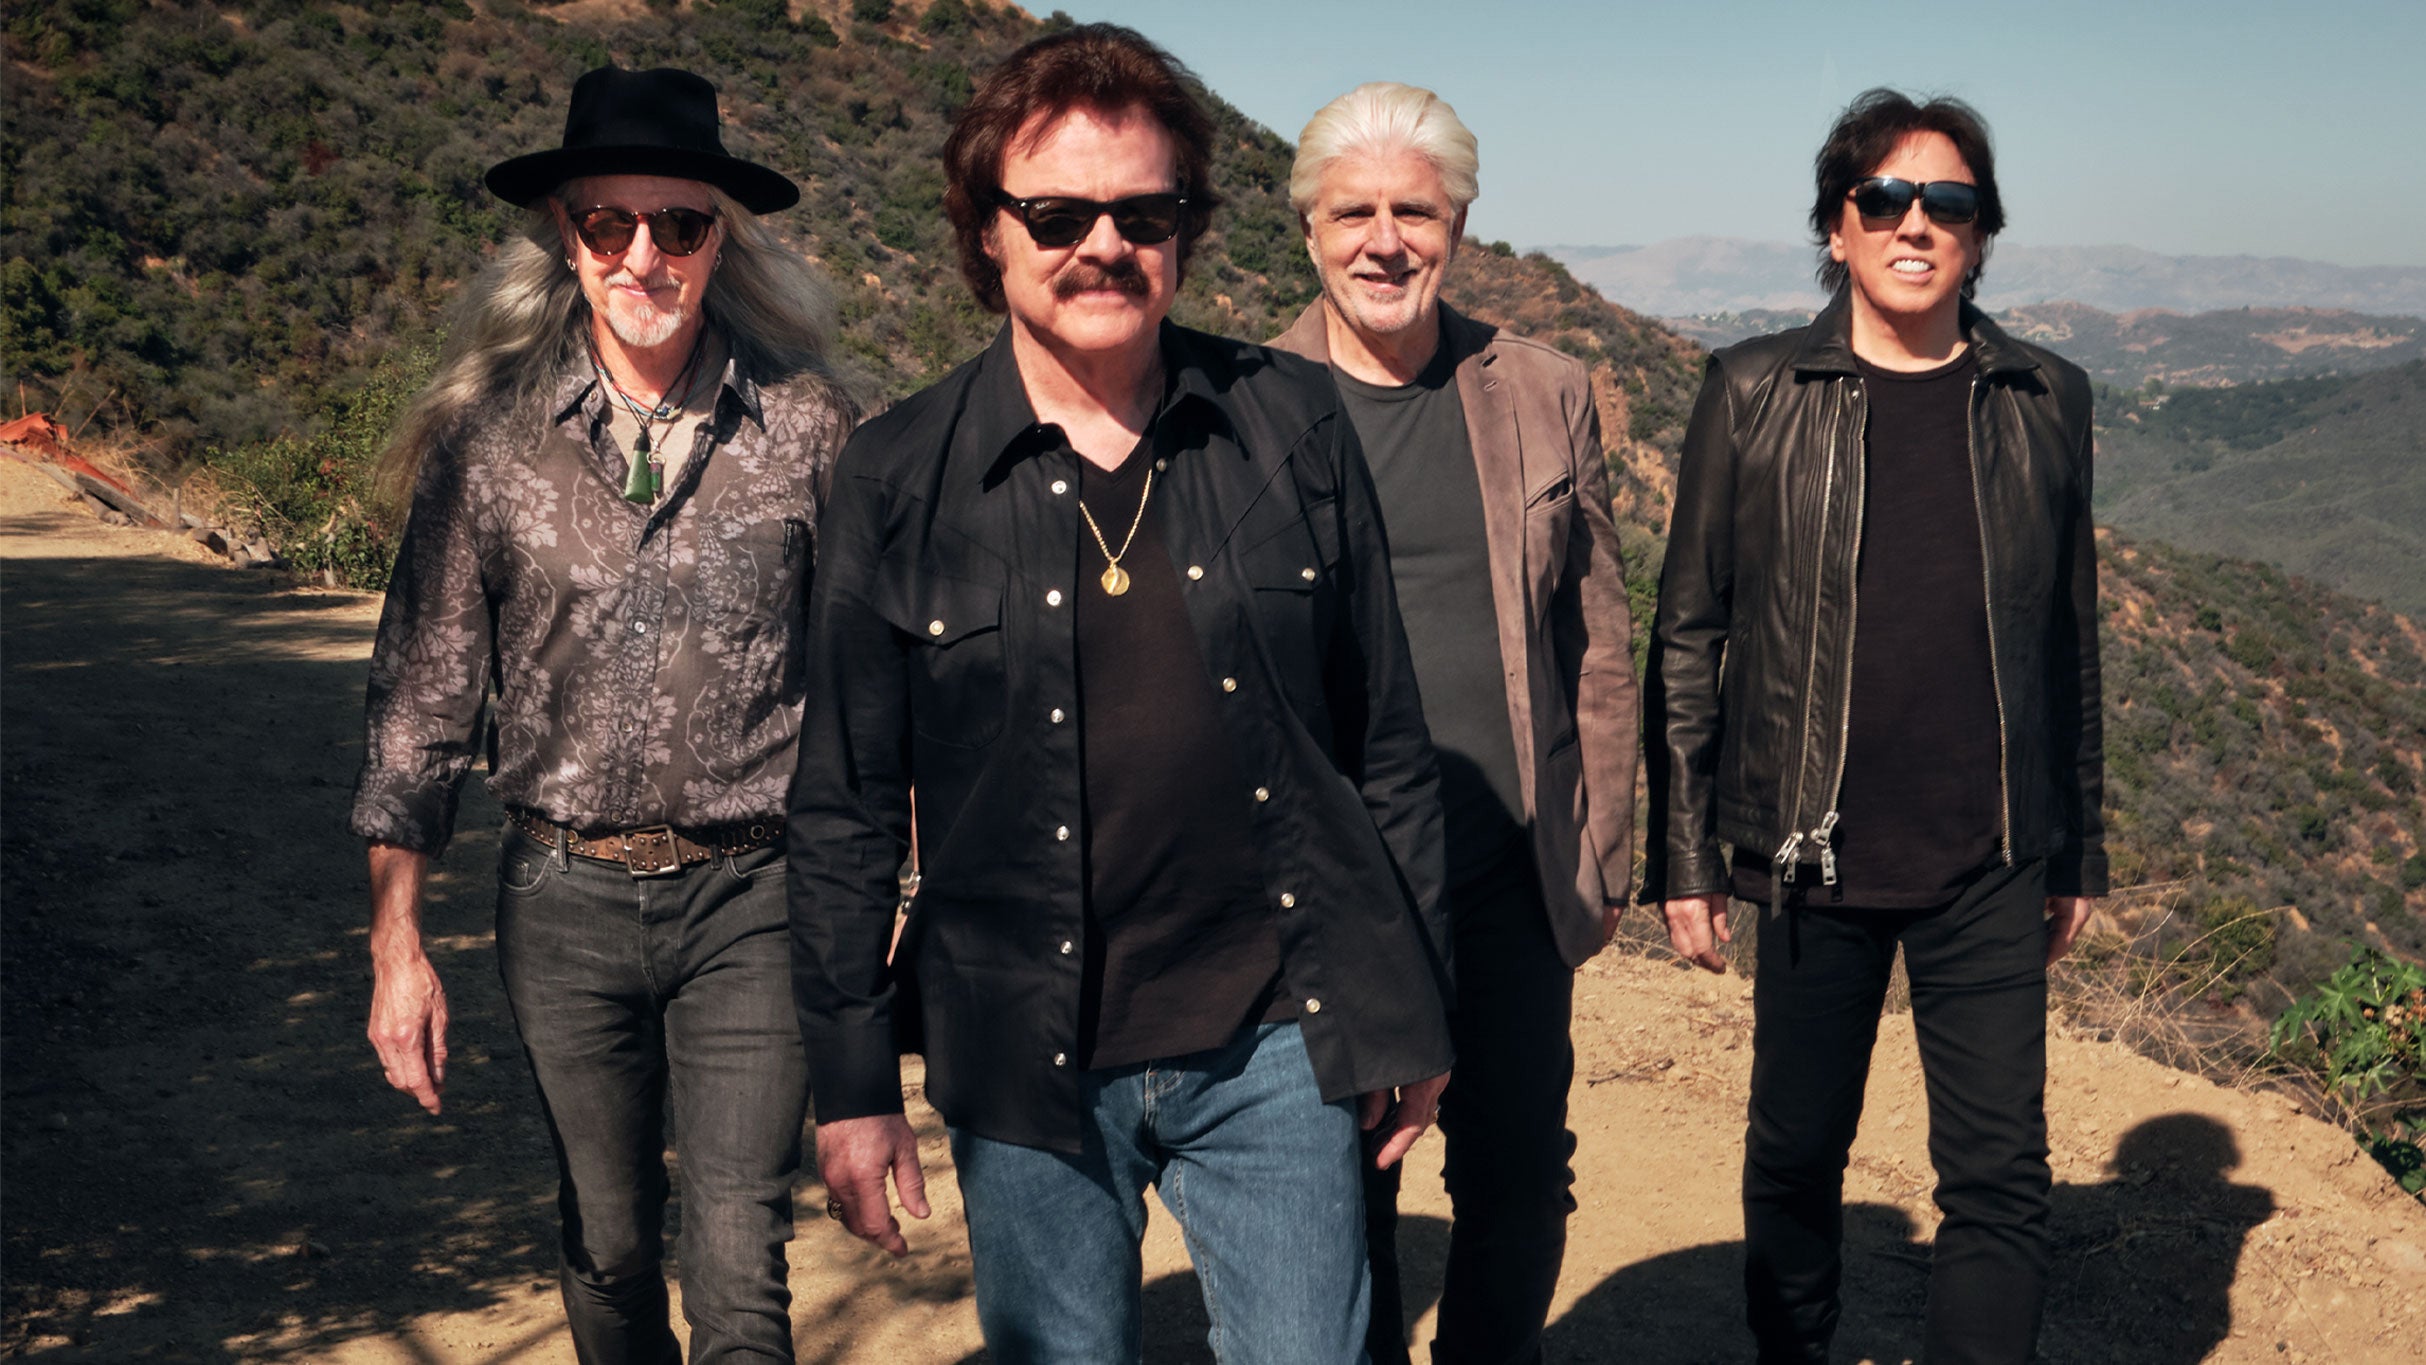 The Doobie Brothers free pre-sale code for event tickets in Des Moines, IA (Wells Fargo Arena)